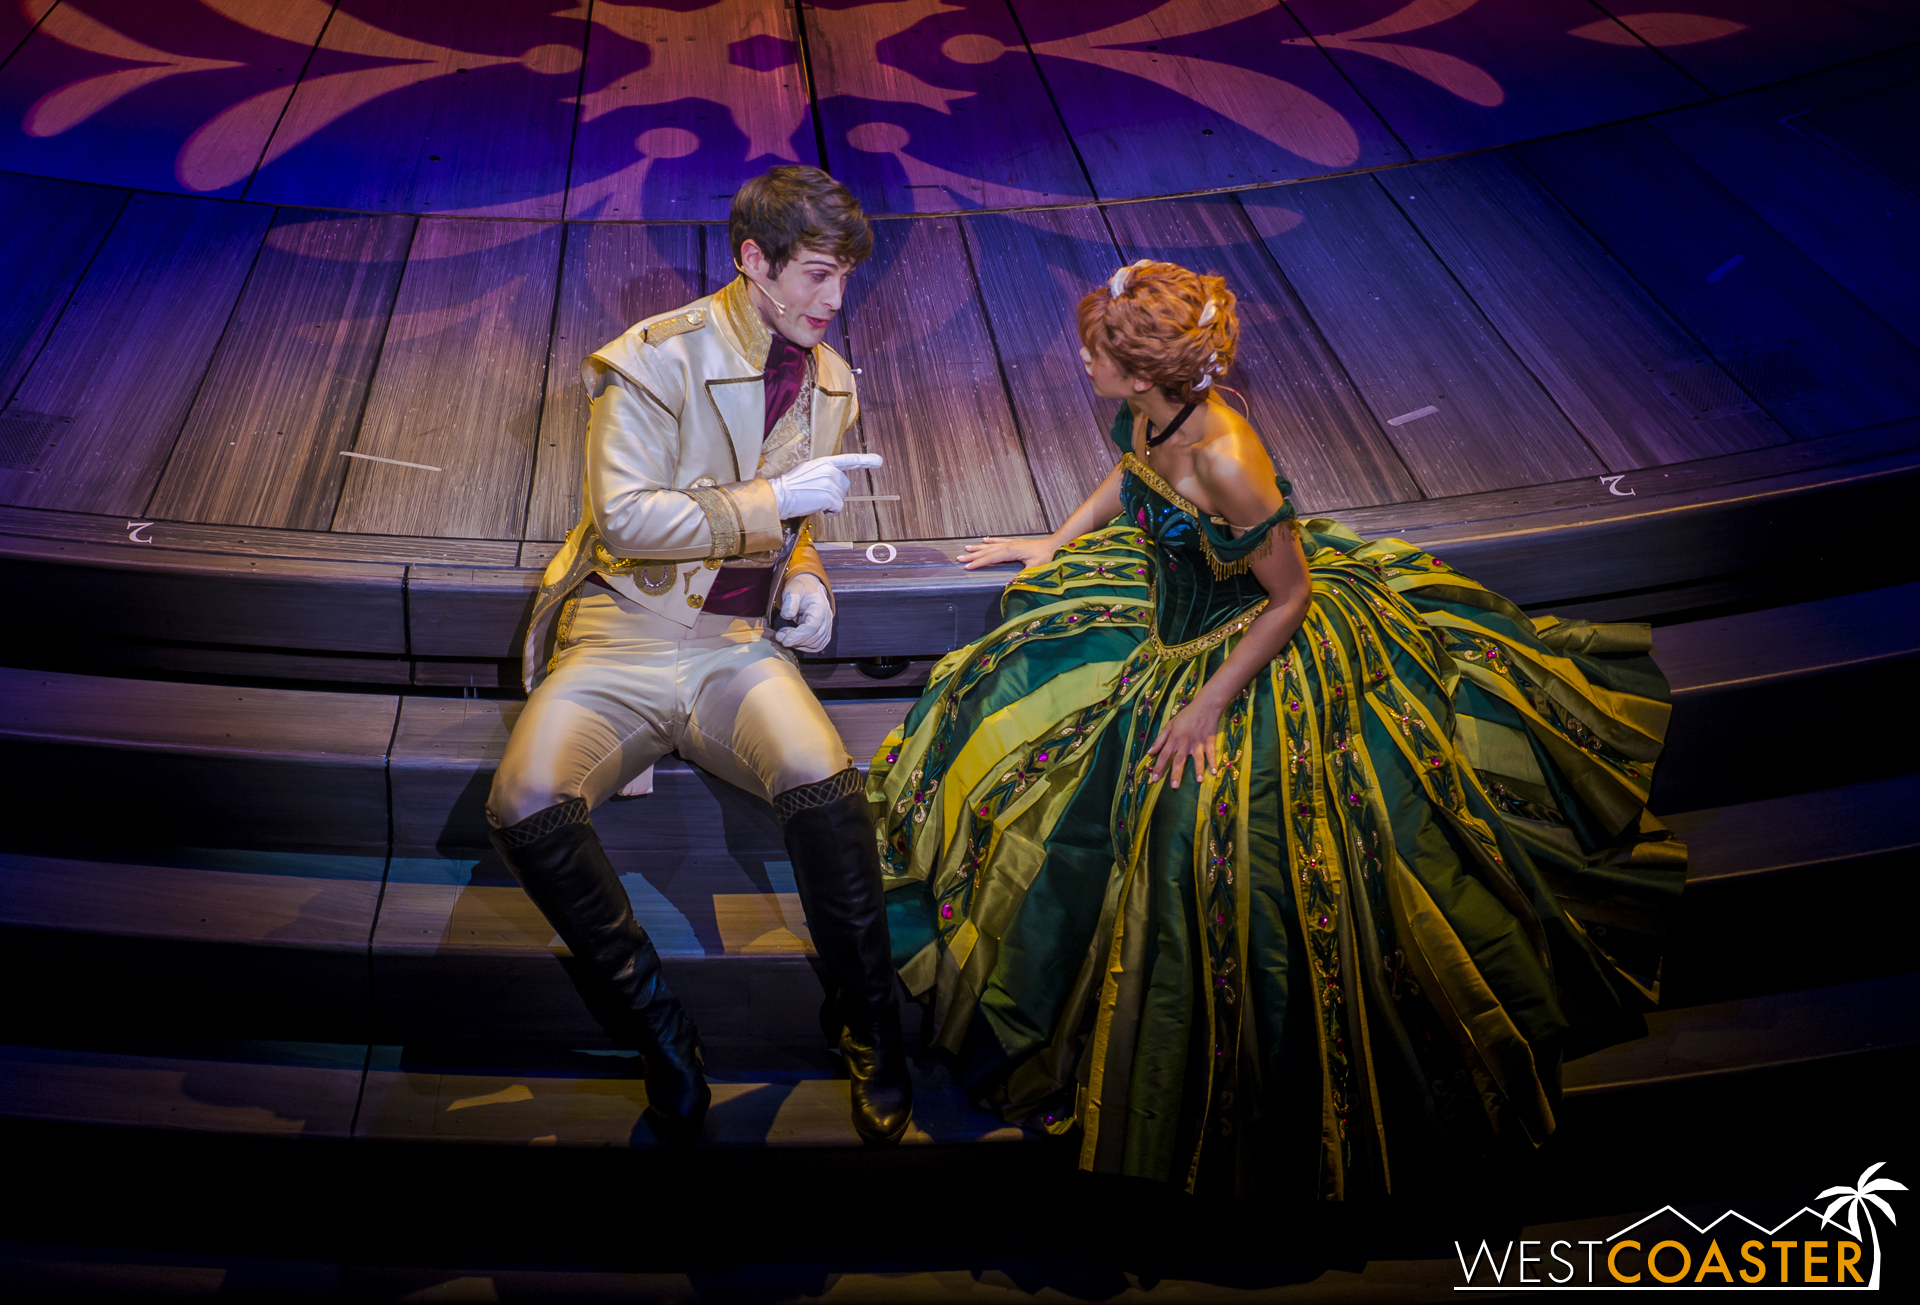  While Elsa isn't looking, Hans and Anna quietly discuss contingency plans in case the great dance does not sway Elsa. 